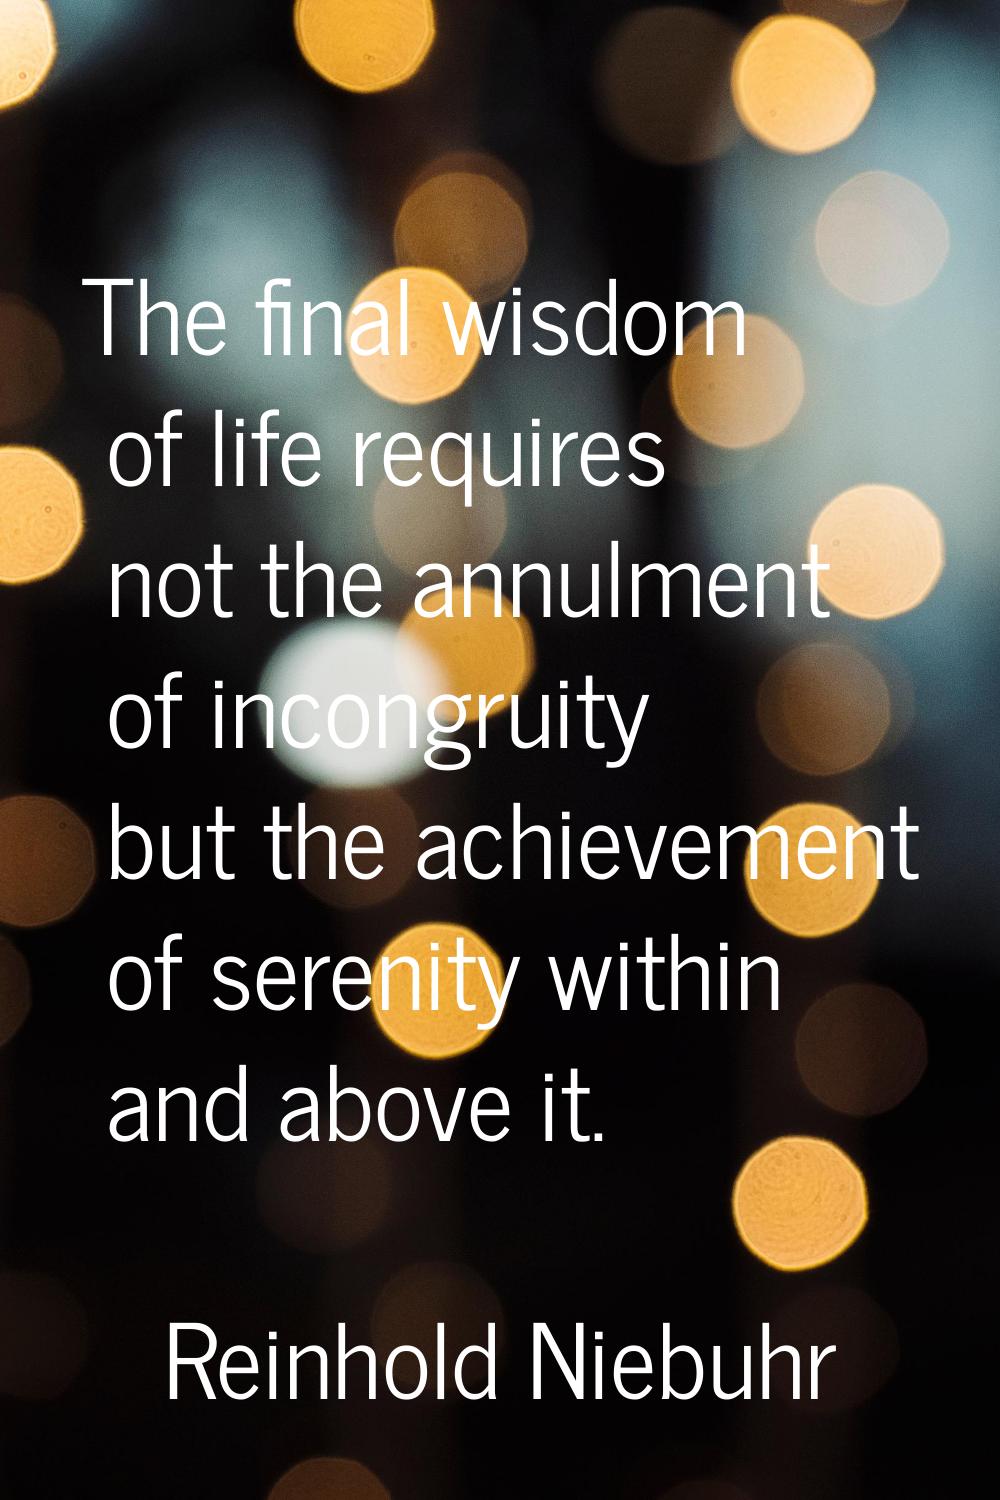 The final wisdom of life requires not the annulment of incongruity but the achievement of serenity 